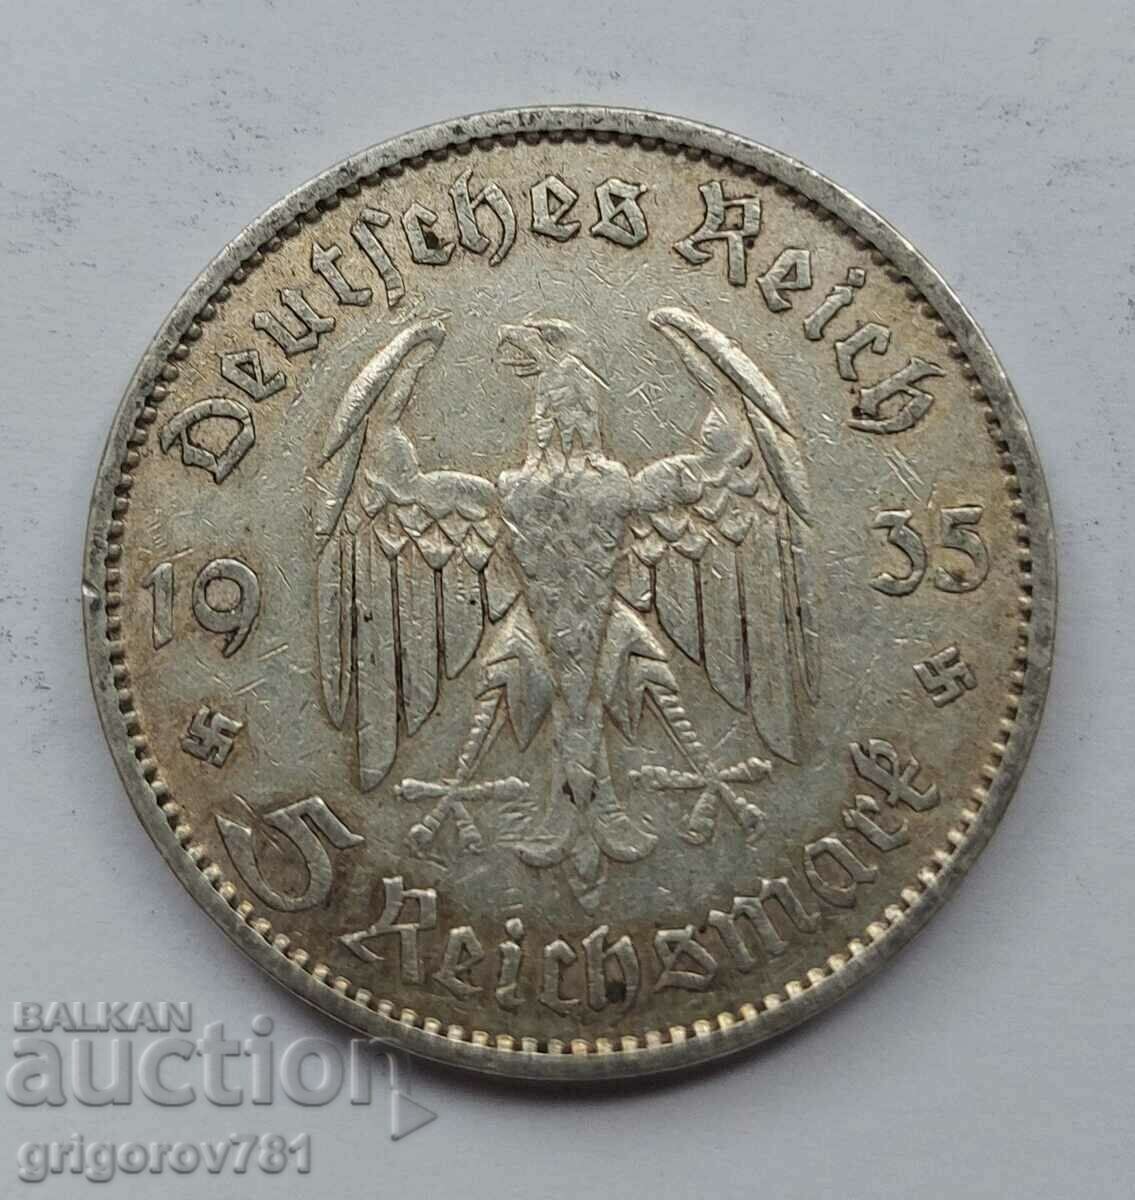 5 Marks Silver Germany 1935 A III Reich Silver Coin #81